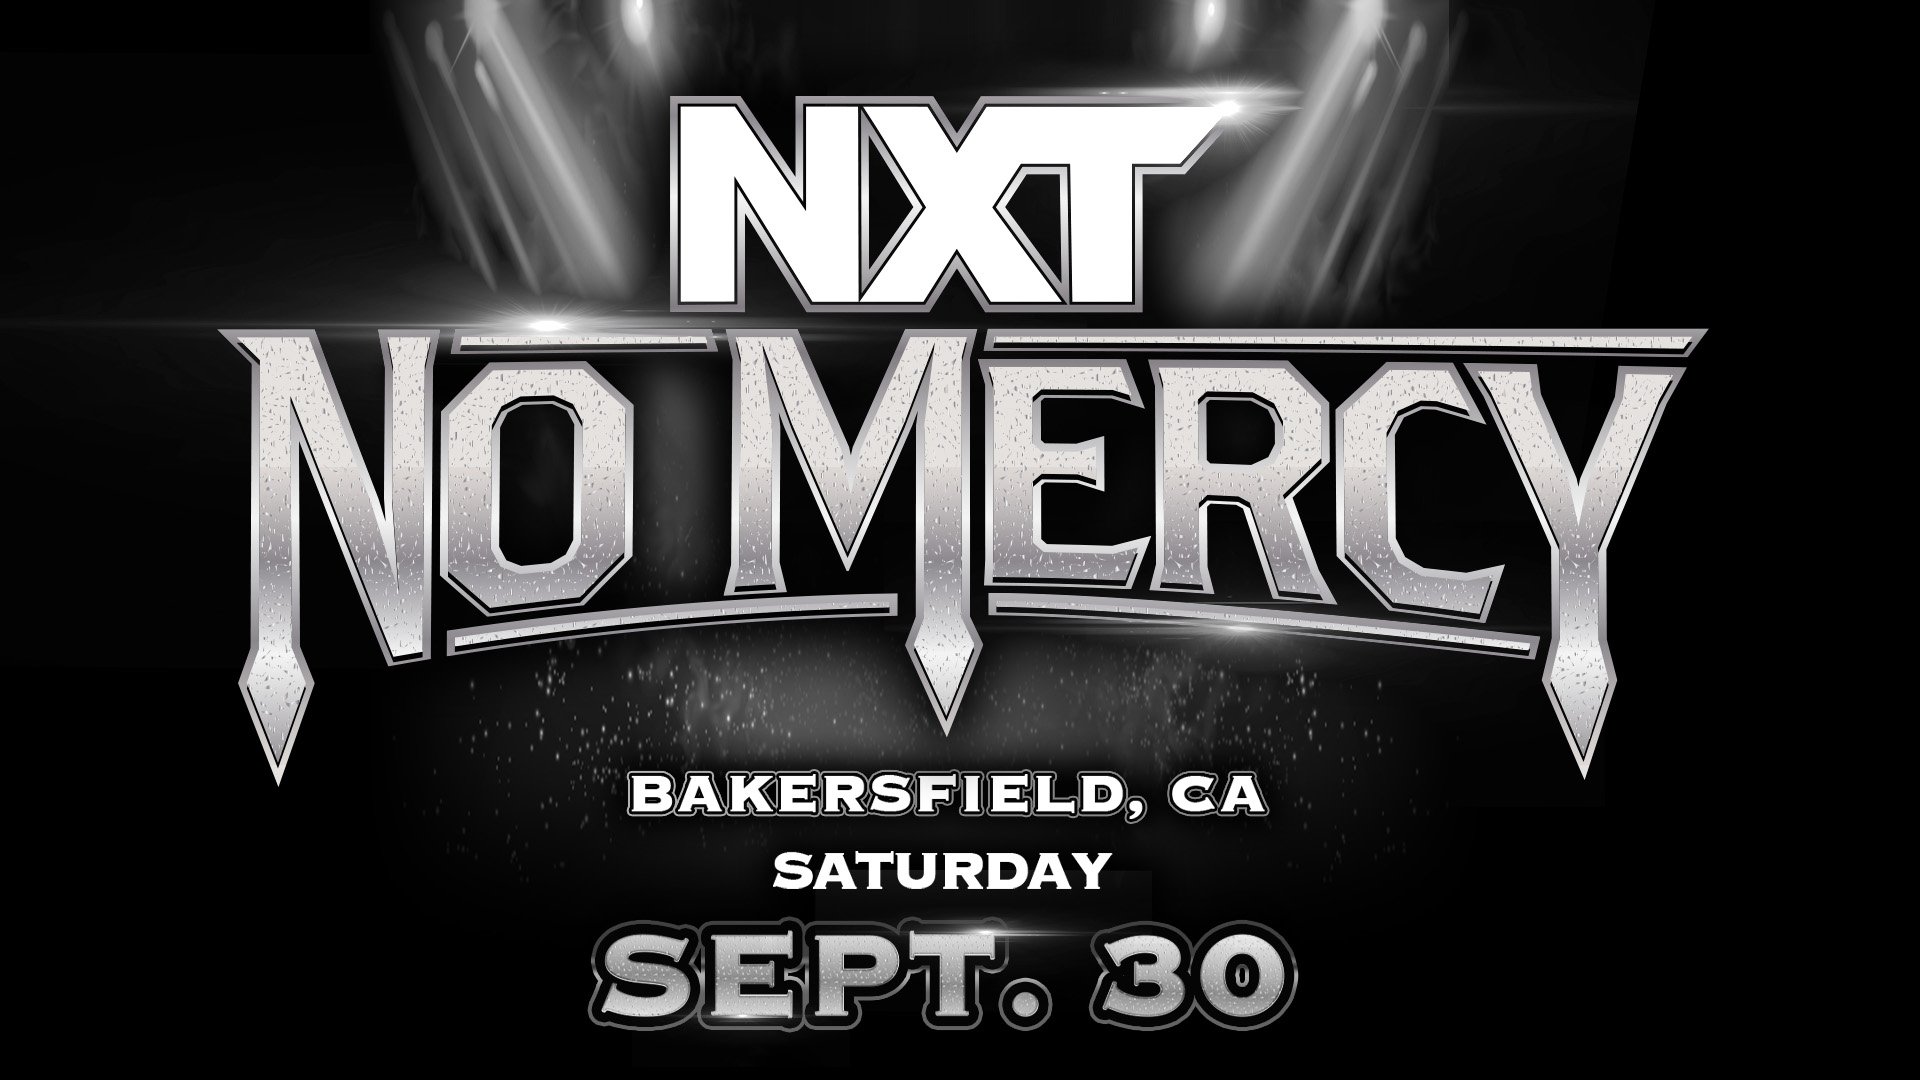 NXT No Mercy set for Bakersfield, CA on September 30 WWE